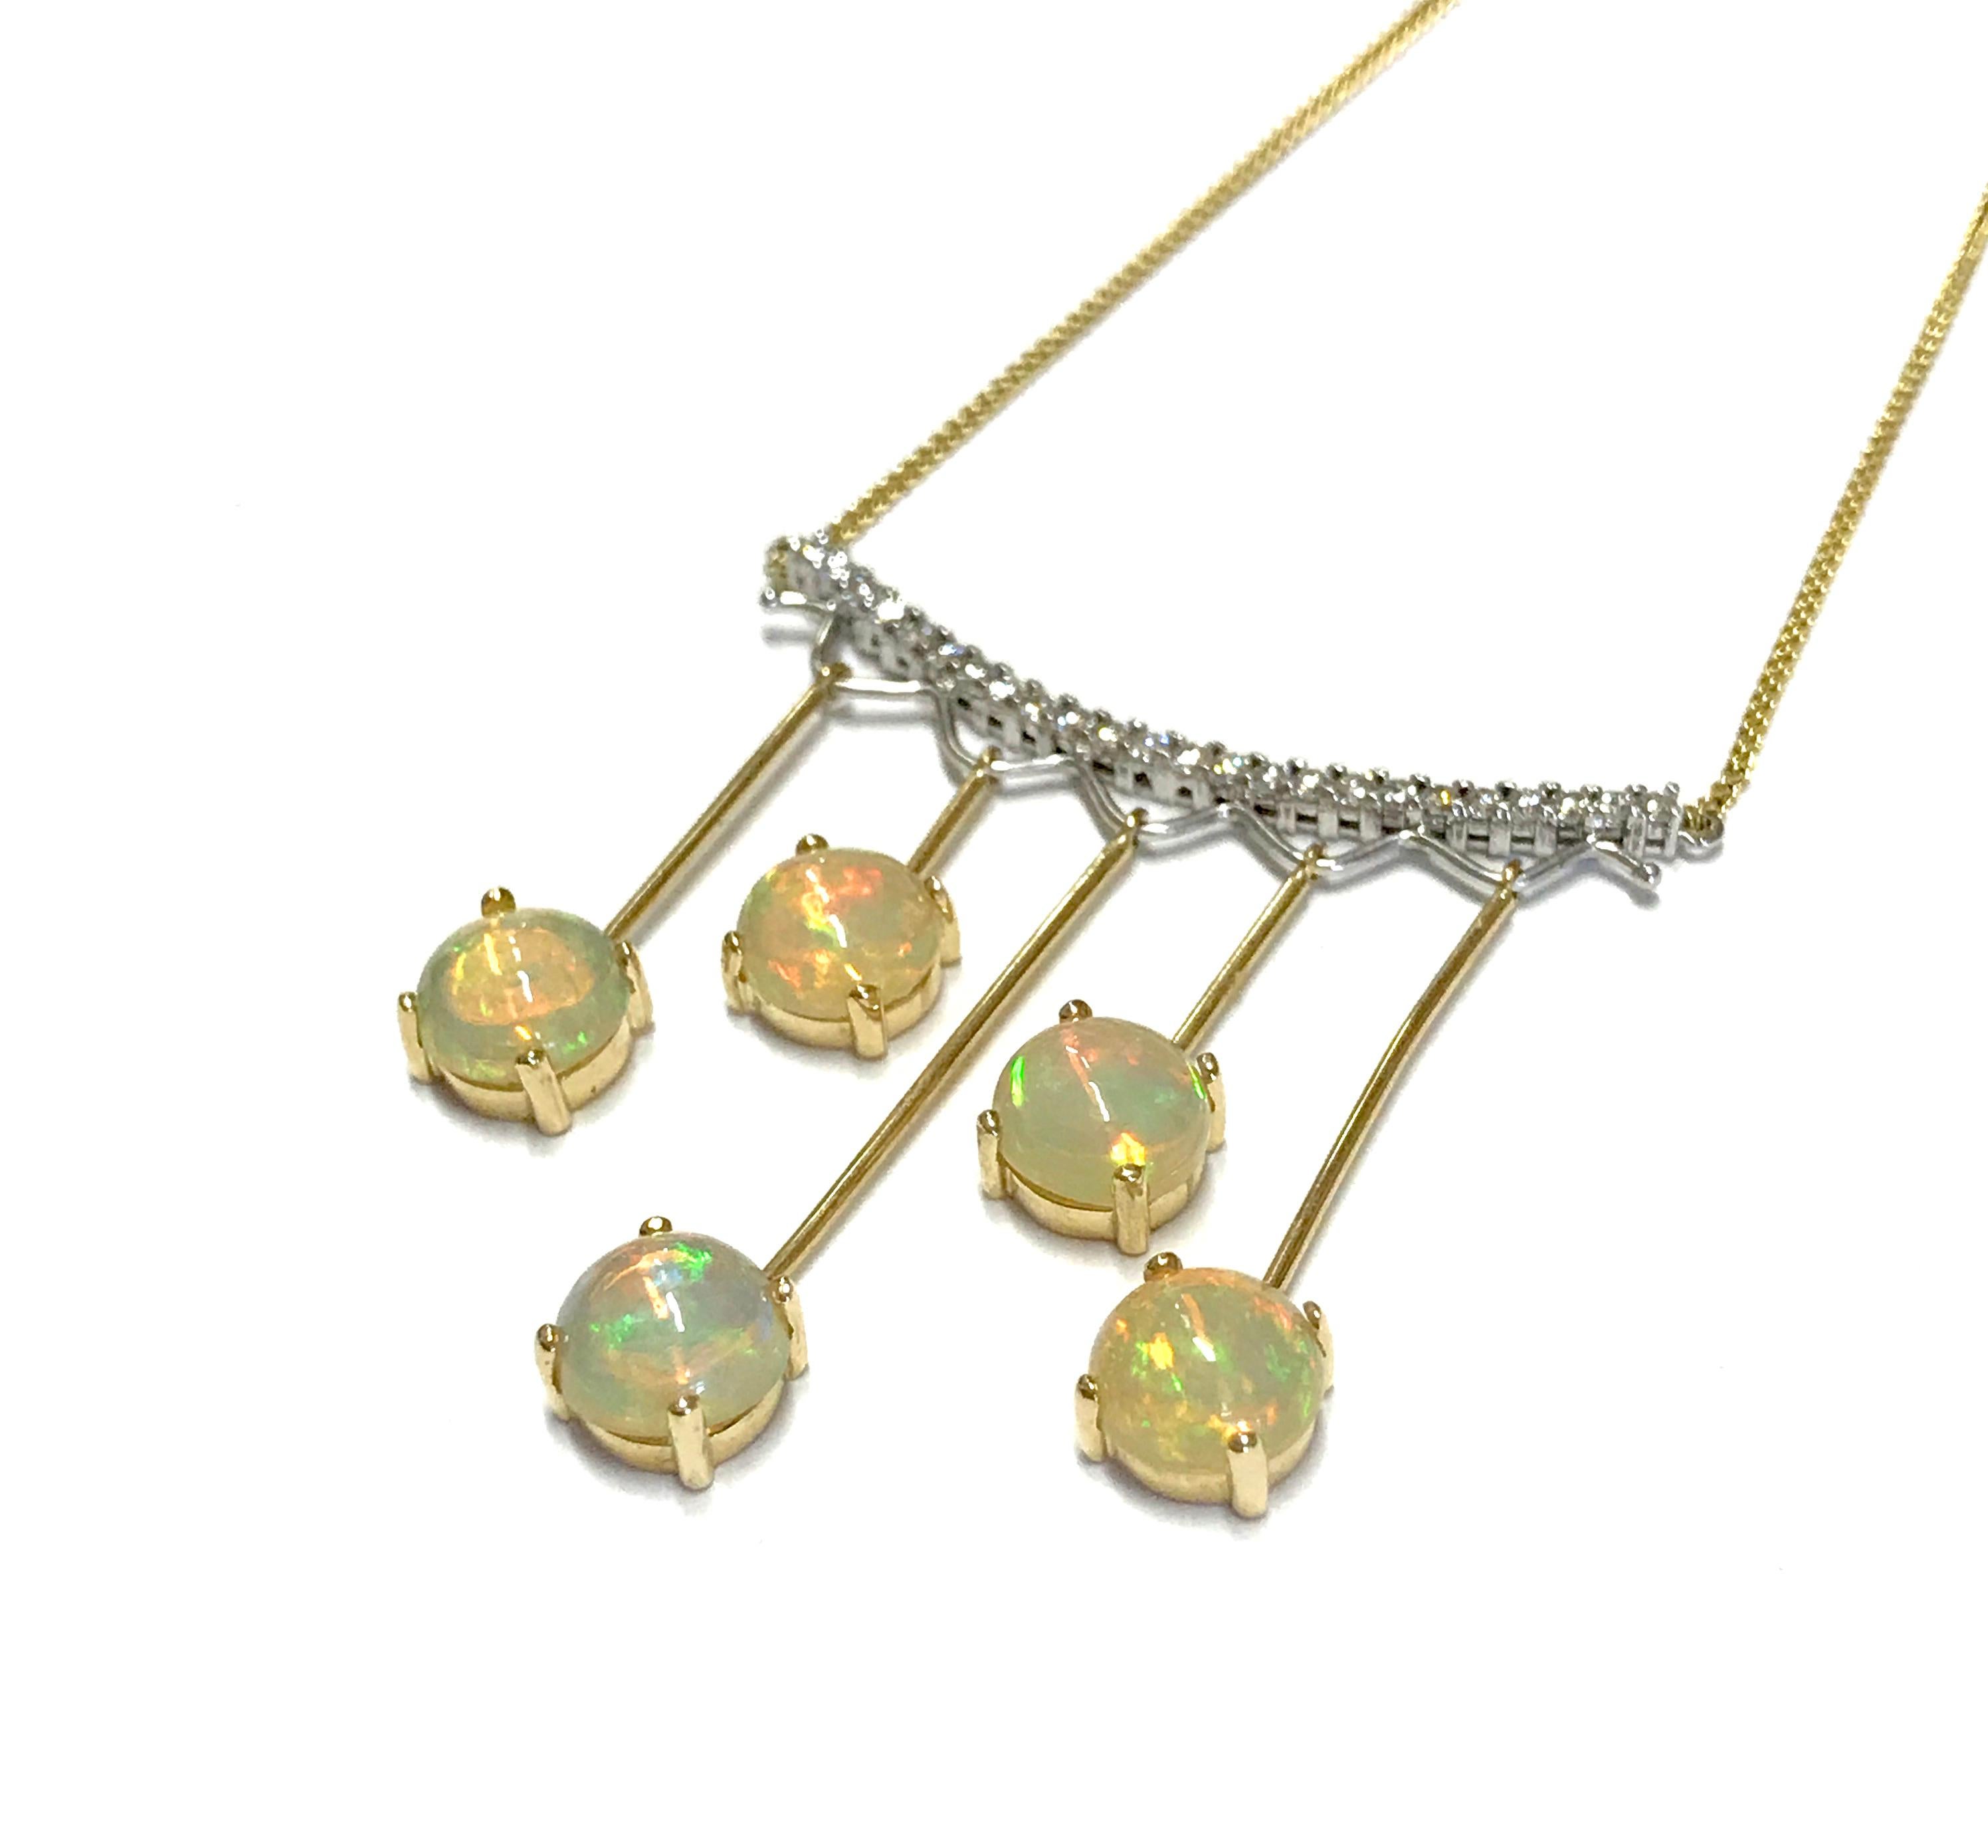 Material: 14k Yellow Gold 
Center Stone Details: 5 Round Opals at 5.97 carats
Mounting Stone Details: 24 Brilliant Round White Diamonds at 0.48 Carats - Clarity: SI / Color
Chain Length:  18 Inch

Fine one-of-a-kind craftsmanship meets incredible